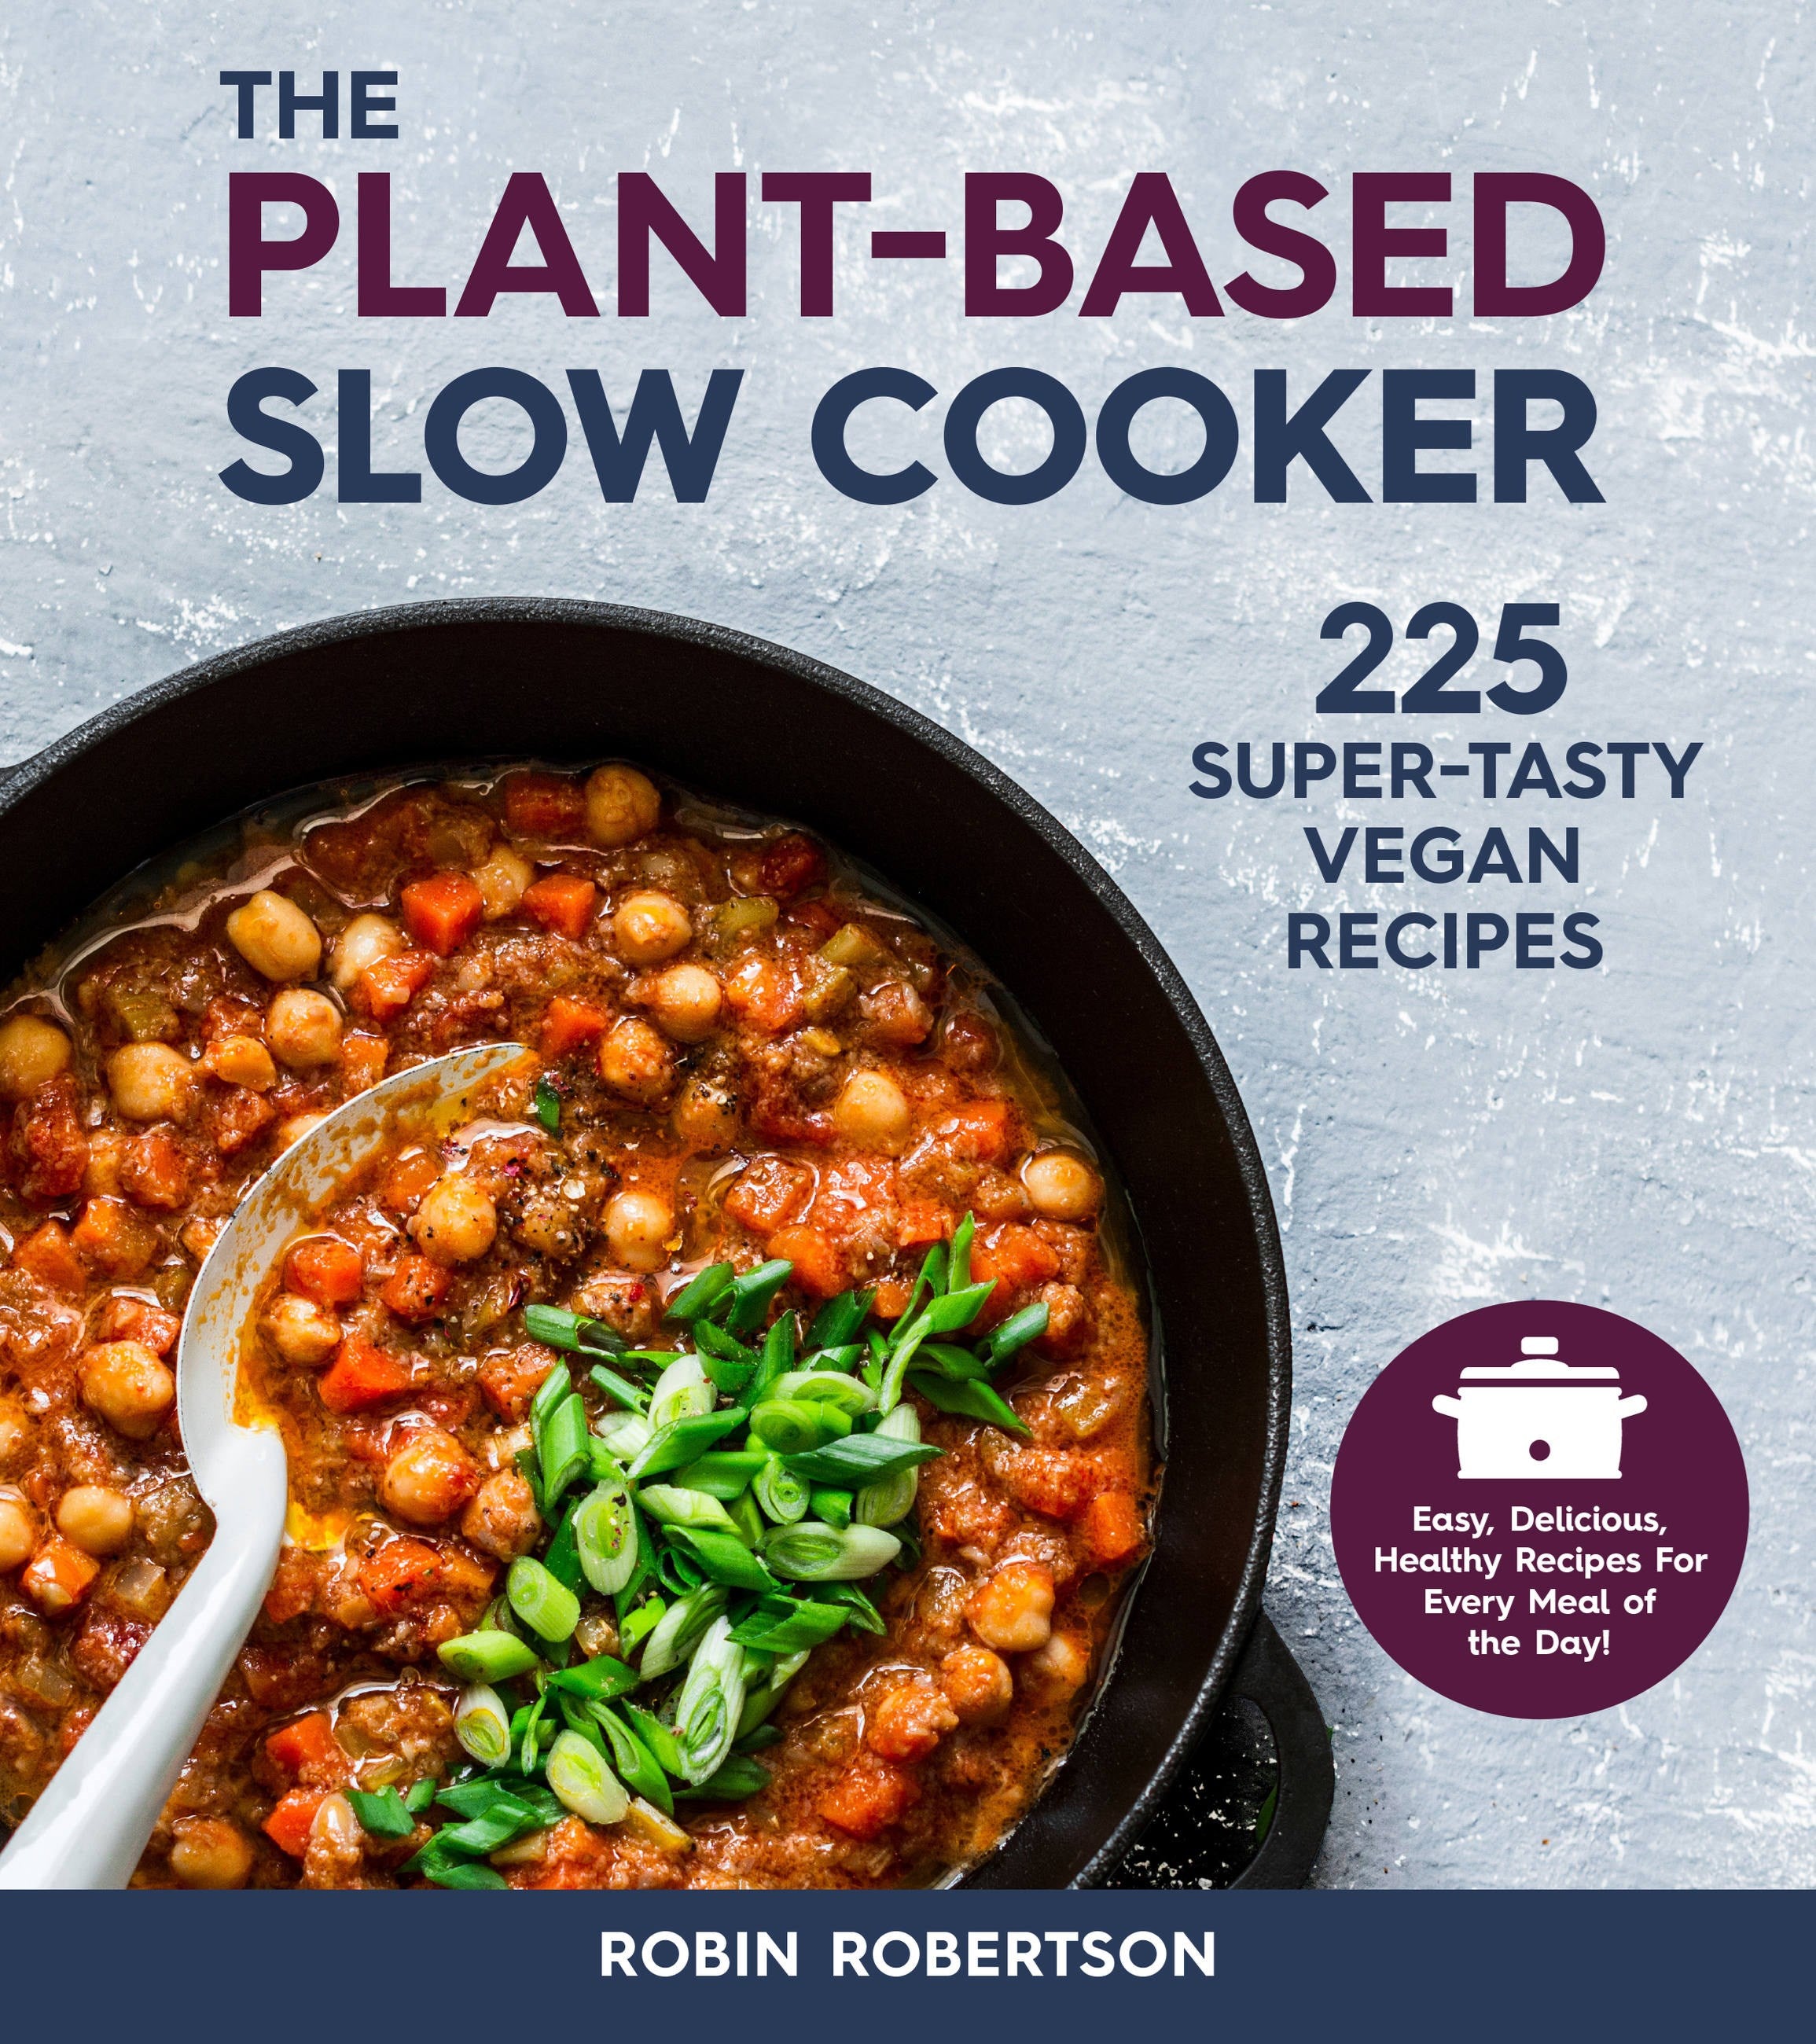 The Plant-Based Slow Cooker: 225 Super-Tasty Vegan Recipes - Easy, Delicious, Healthy Recipes For Every Meal of the Day! (Revised)